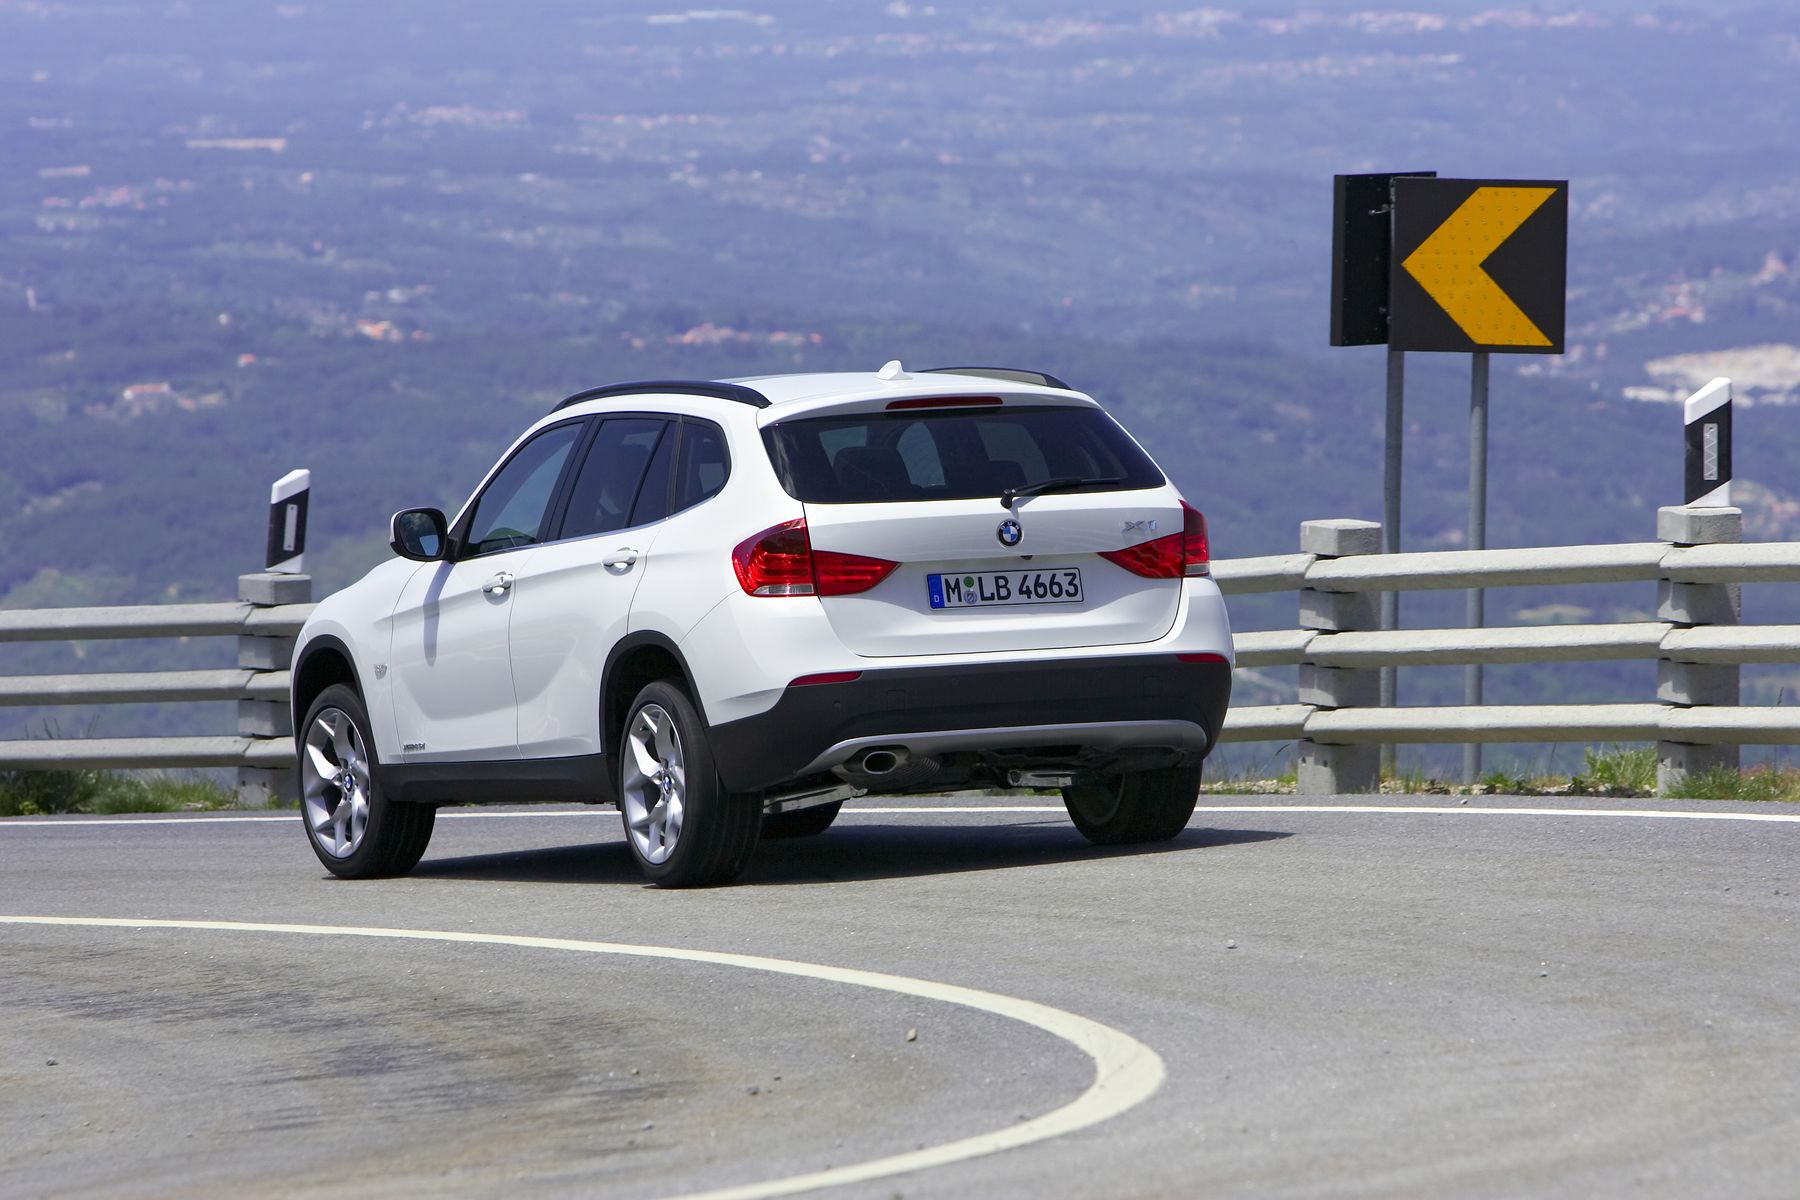 BMW X1 Ultimate Photo Gallery